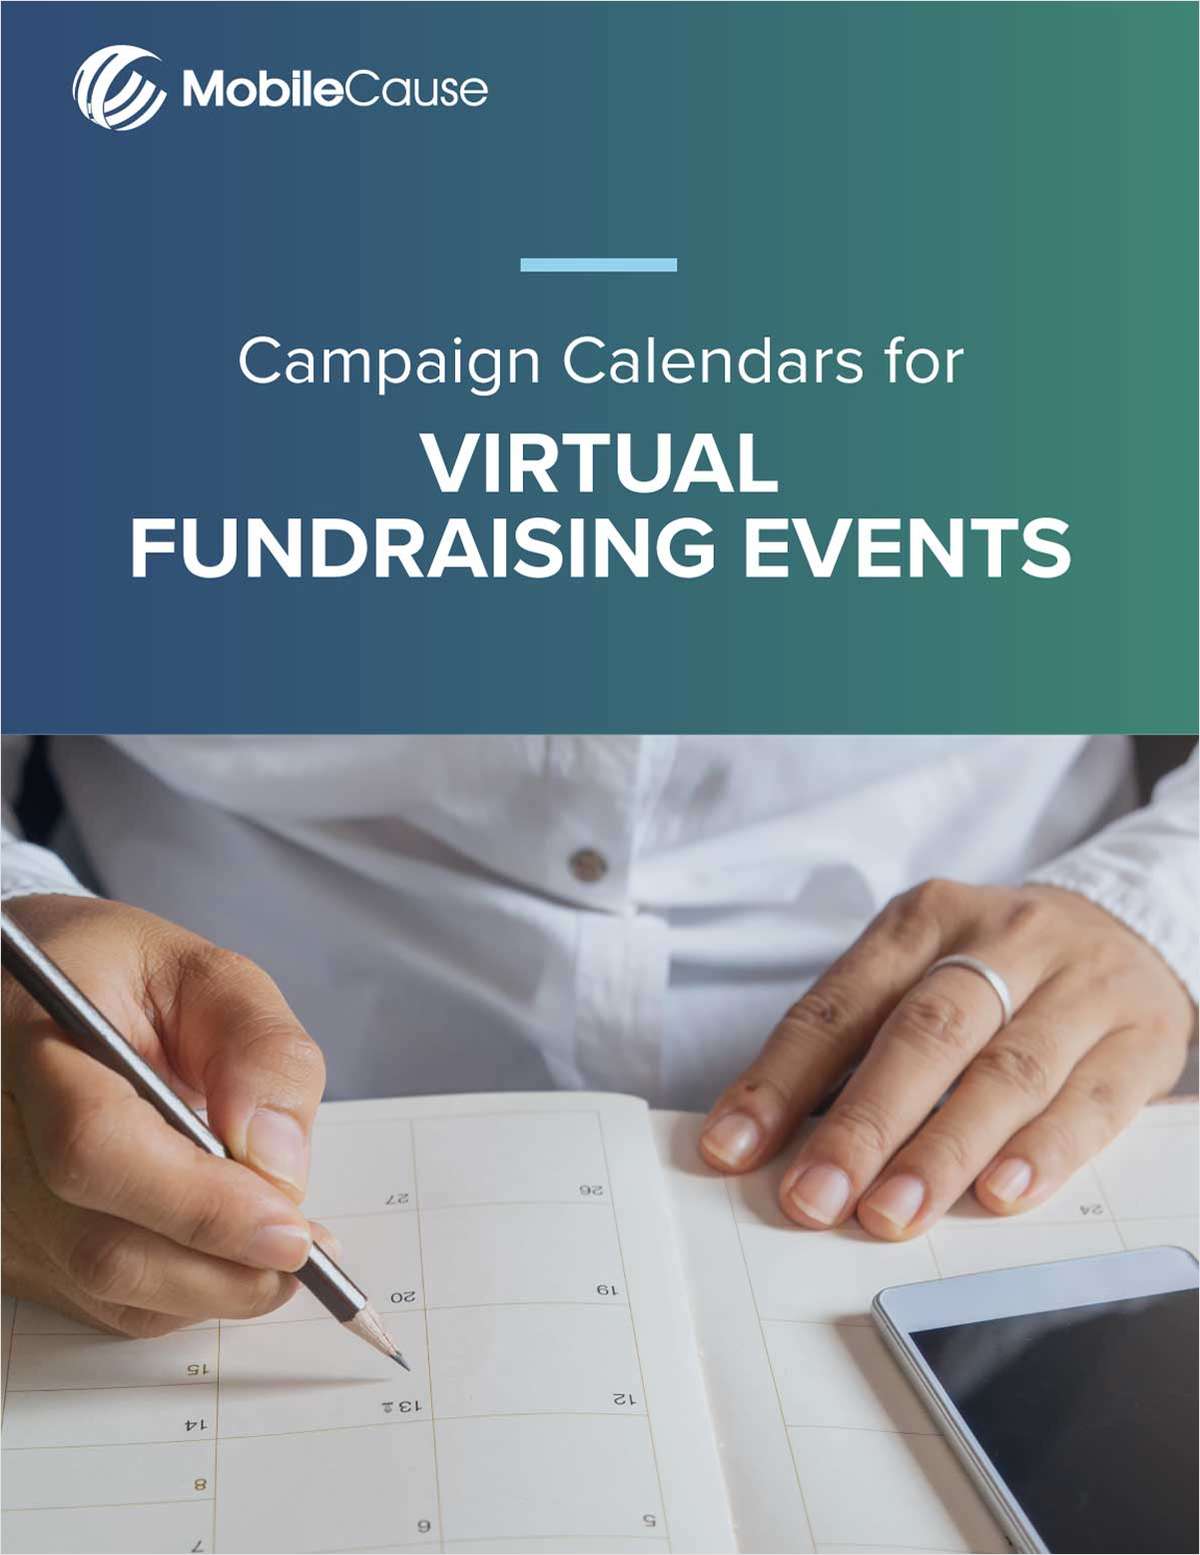 Campaign Calendars for Virtual Fundraising Events